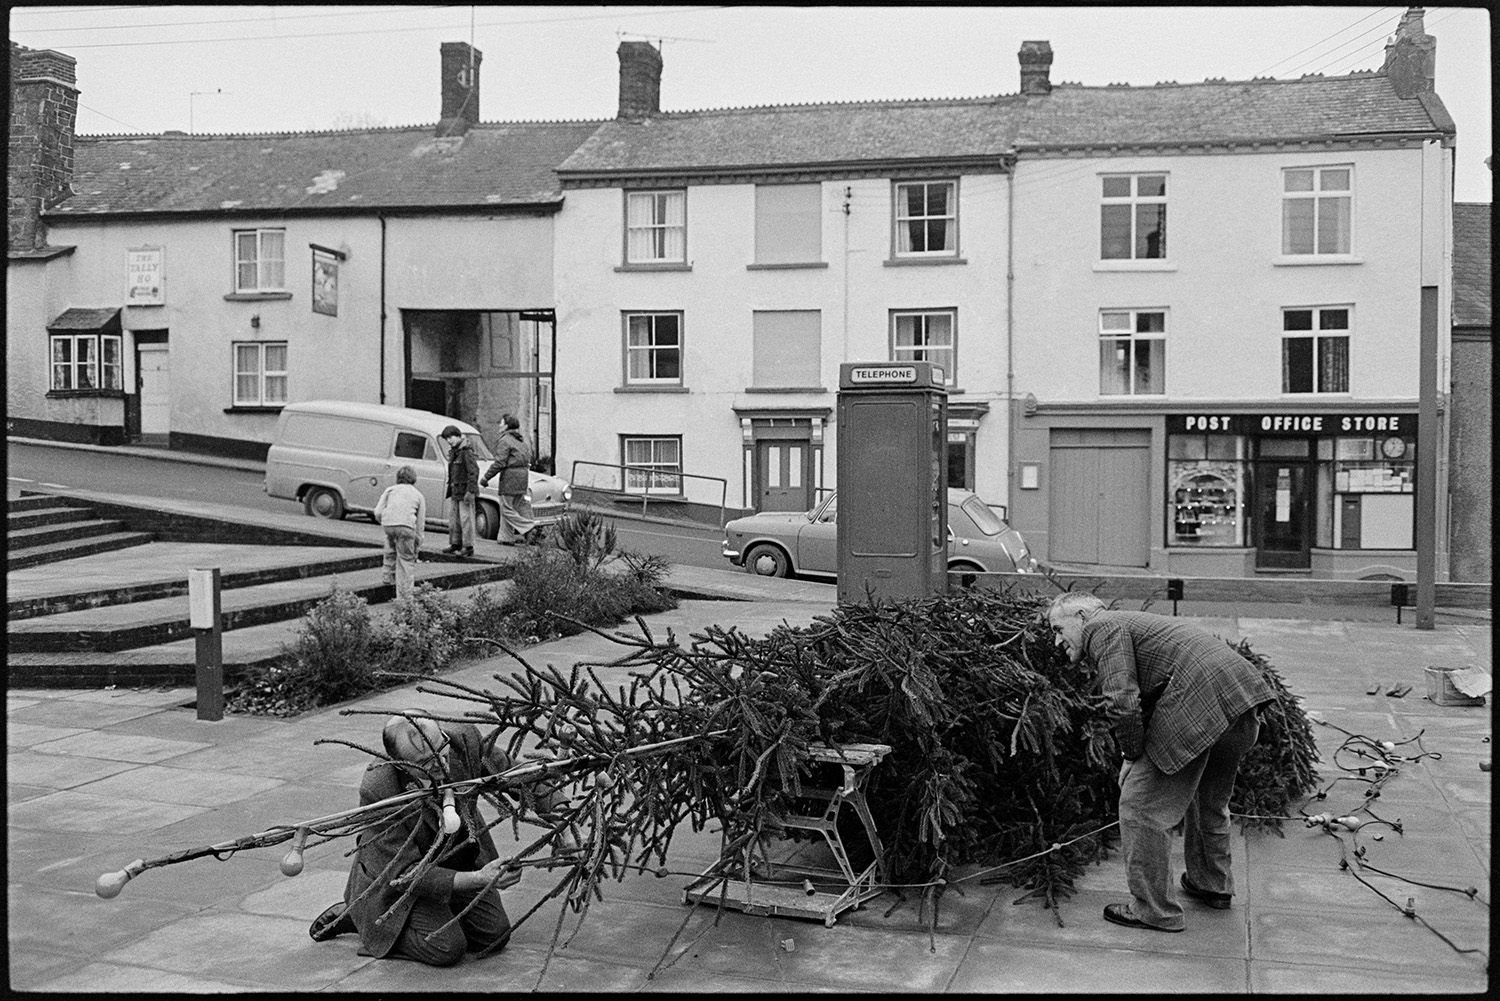 Putting up Christmas tree in town centre. 
[Two men putting up a Christmas tree in the town centre at Hatherleigh, opposite the Post Office and next to a telephone box. In the background people are walking long the street past a parked car and van.]